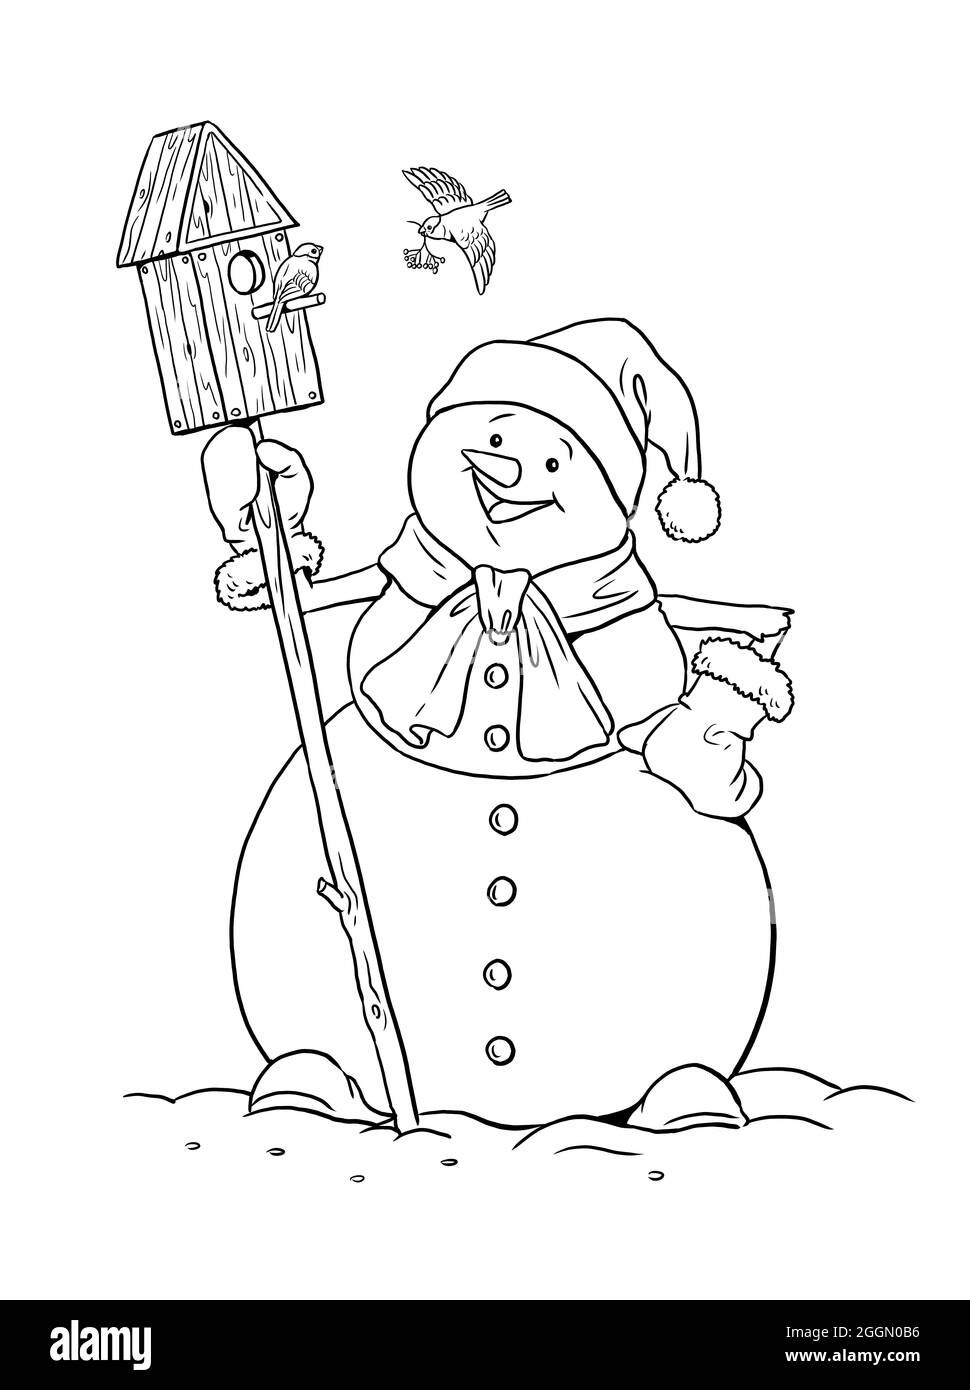 Funny snowman for coloring. Santa Claus friend wishes Merry Christmas. Digital drawing. Stock Photo